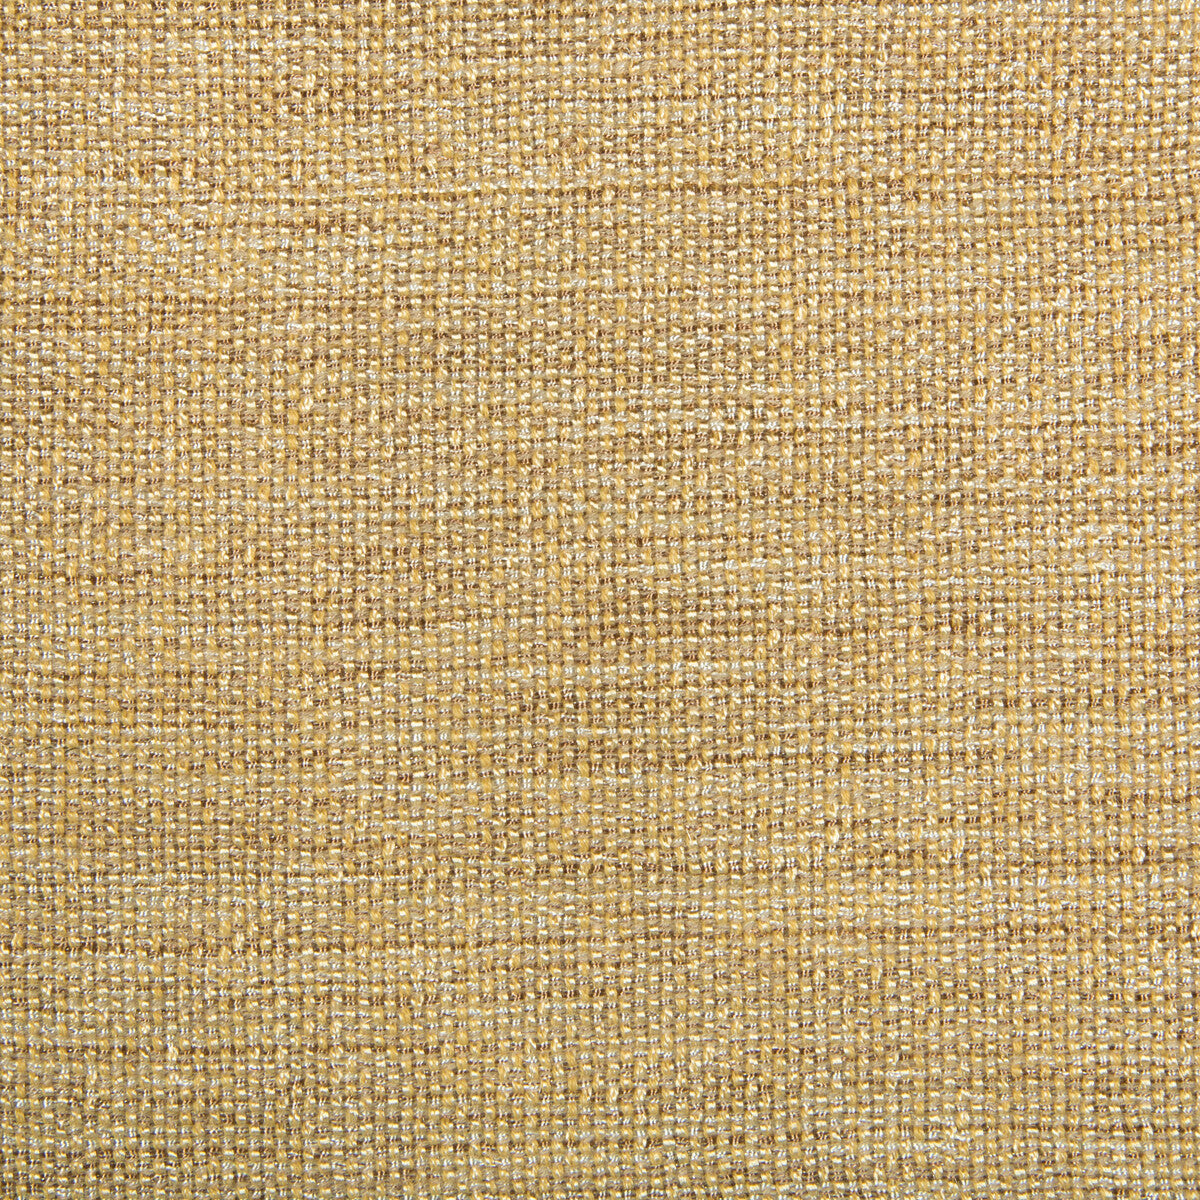 Kravet Contract fabric in 4458-414 color - pattern 4458.414.0 - by Kravet Contract